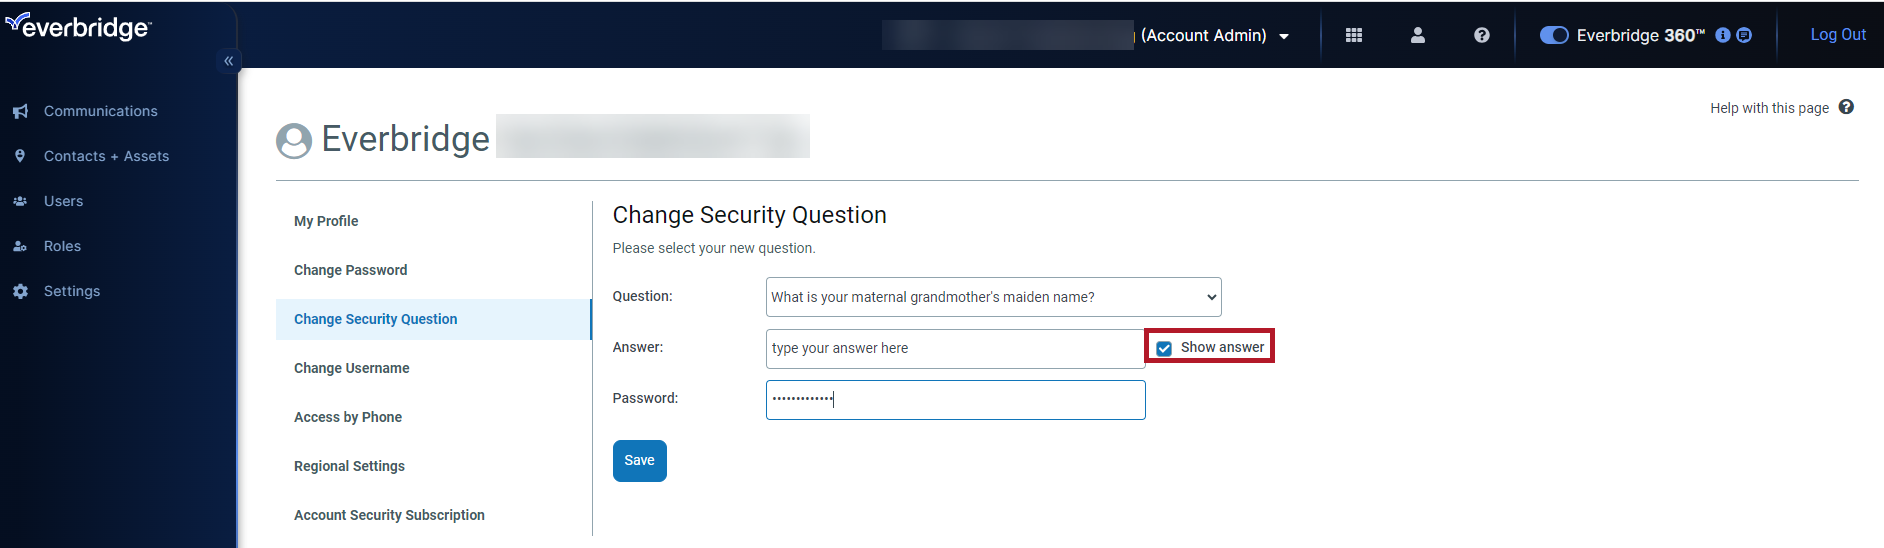 answer and password fields of change security question form 